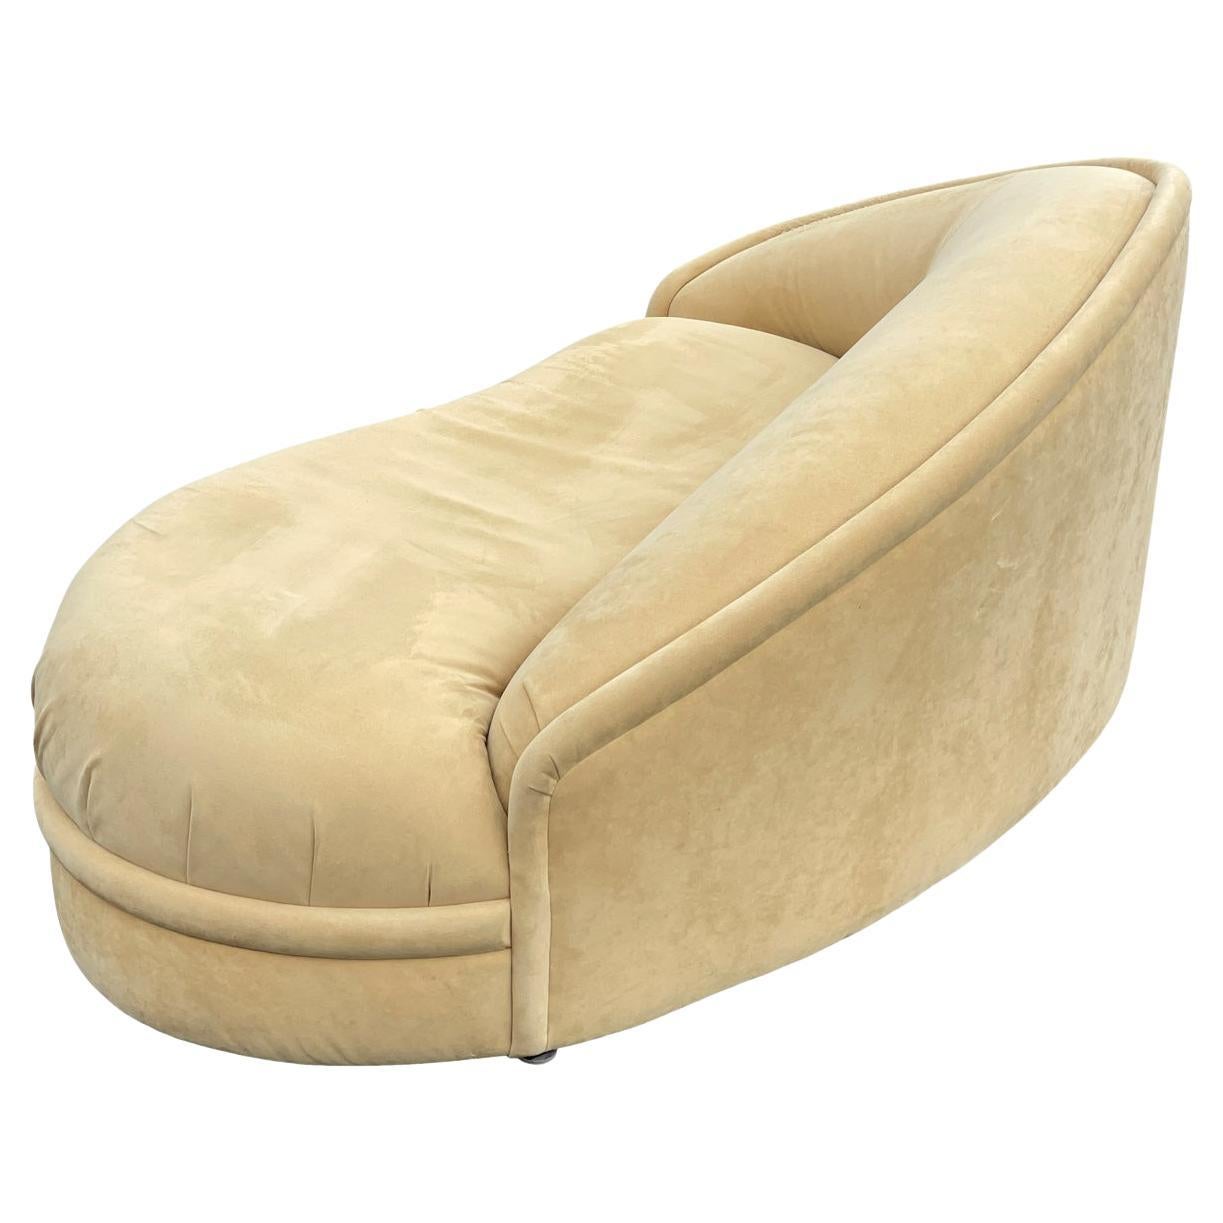 Biomorphic Kidney Shaped Mid-Century Modern Chaise Lounge Sofa For Sale